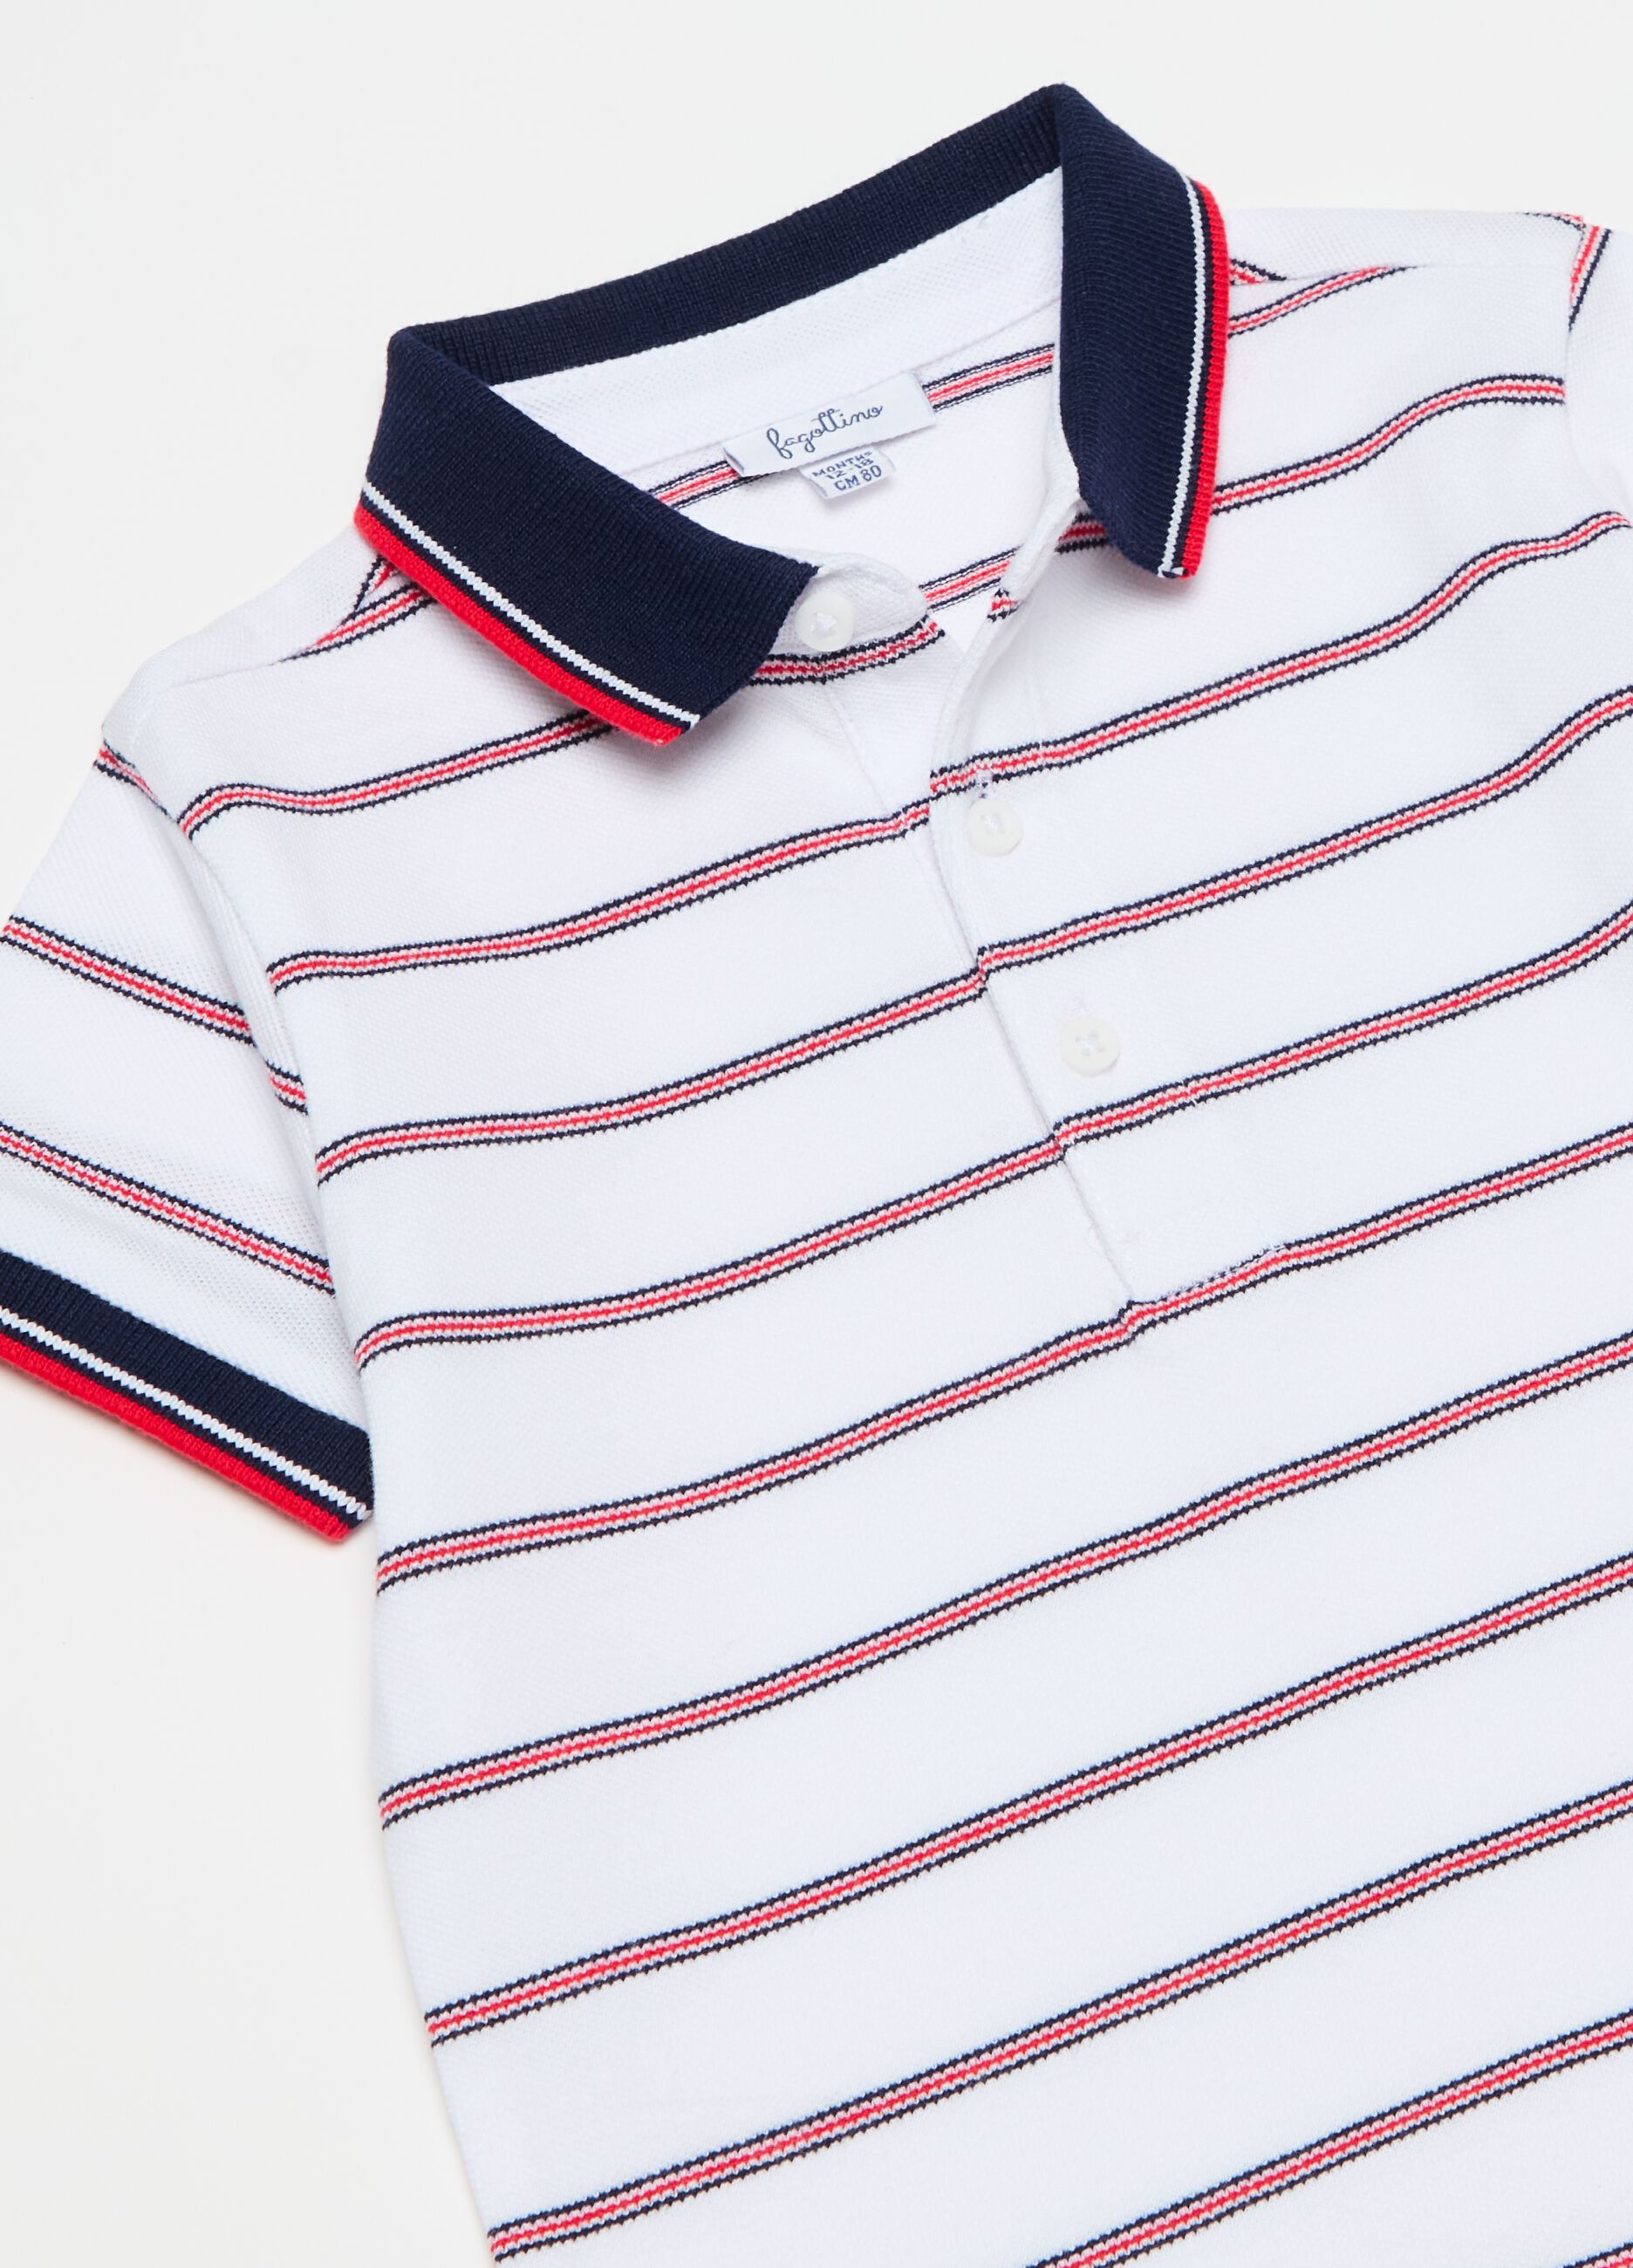 Polo shirt in piquet with striped pattern